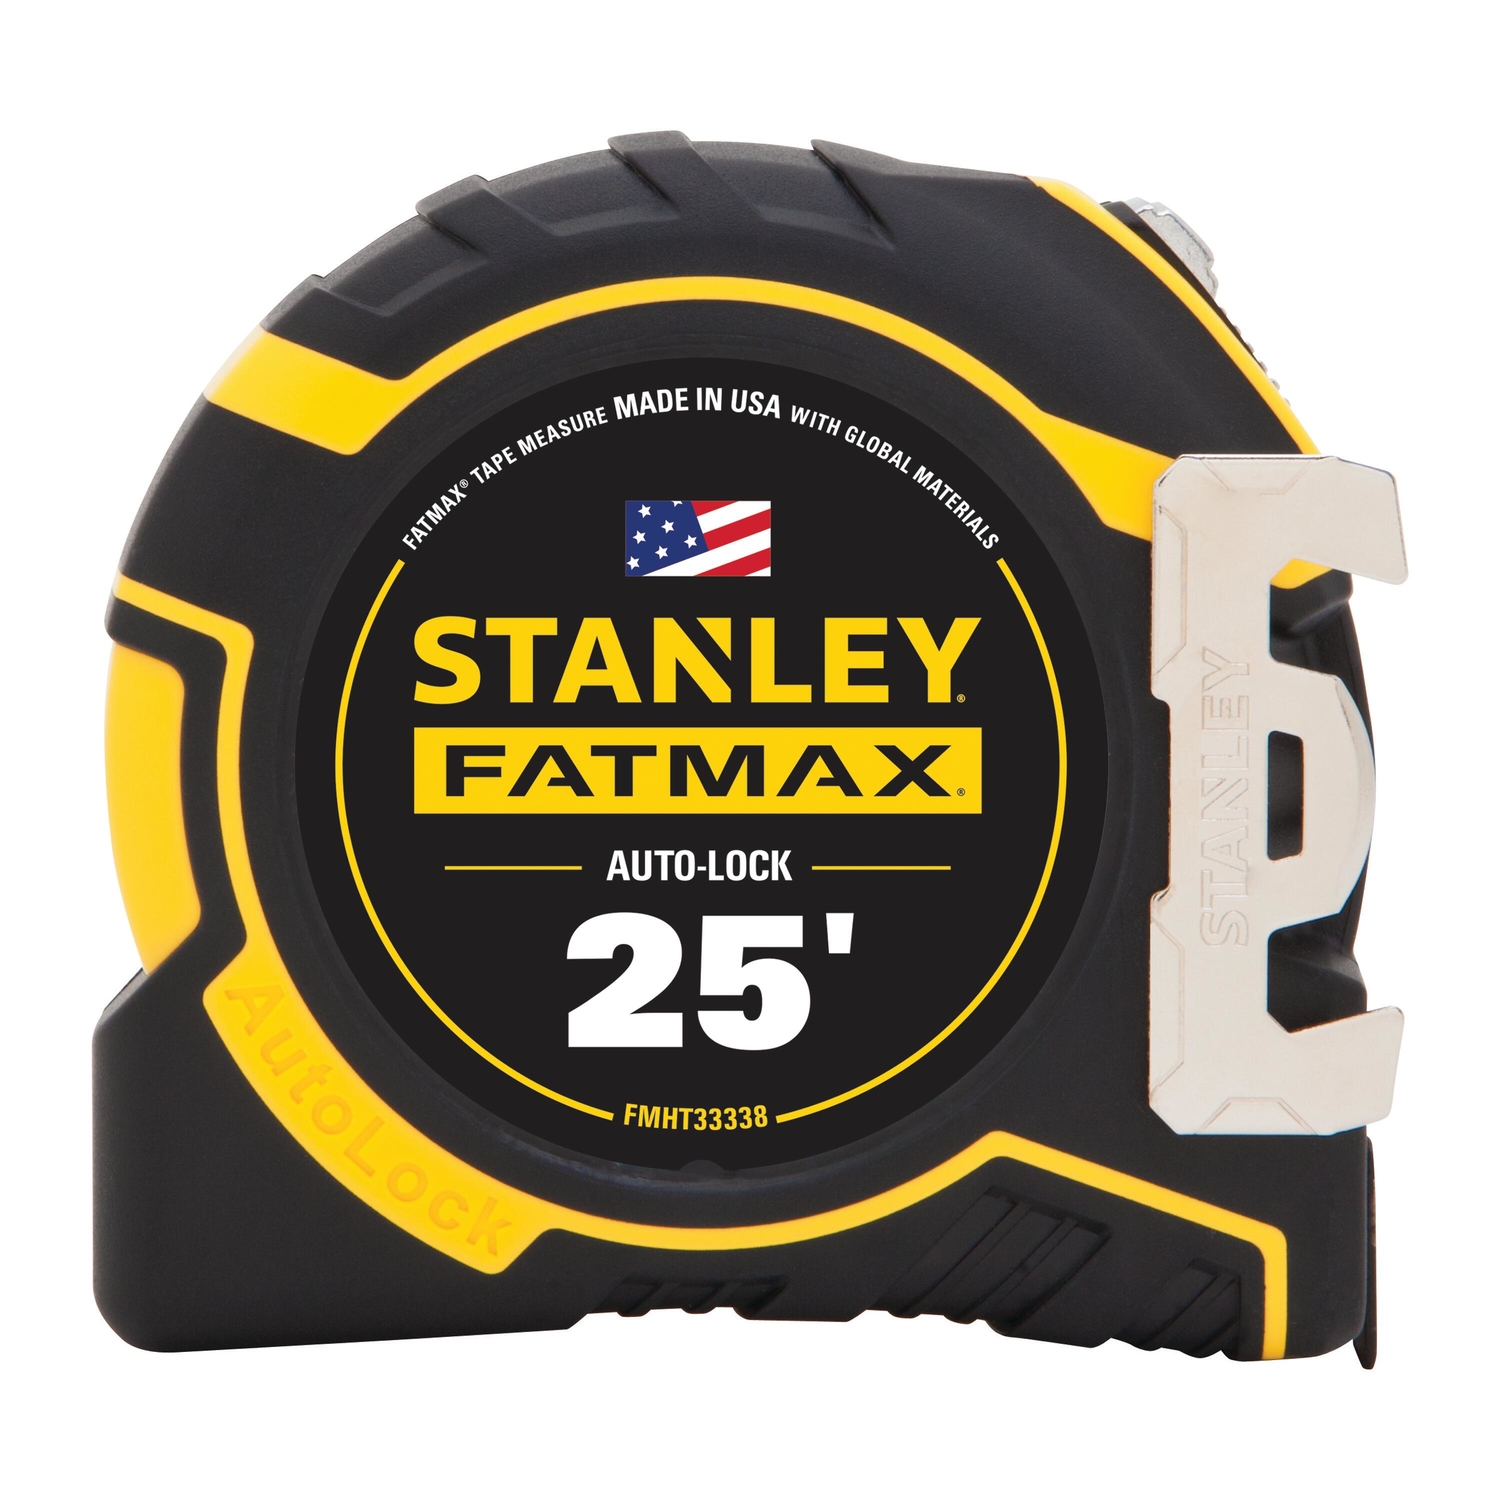 Photos - Tape Measure and Surveyor Tape Stanley Fatmax 25 ft. L X 1.25 in. W Auto Lock Tape Measure 1 pk FMHT33338 